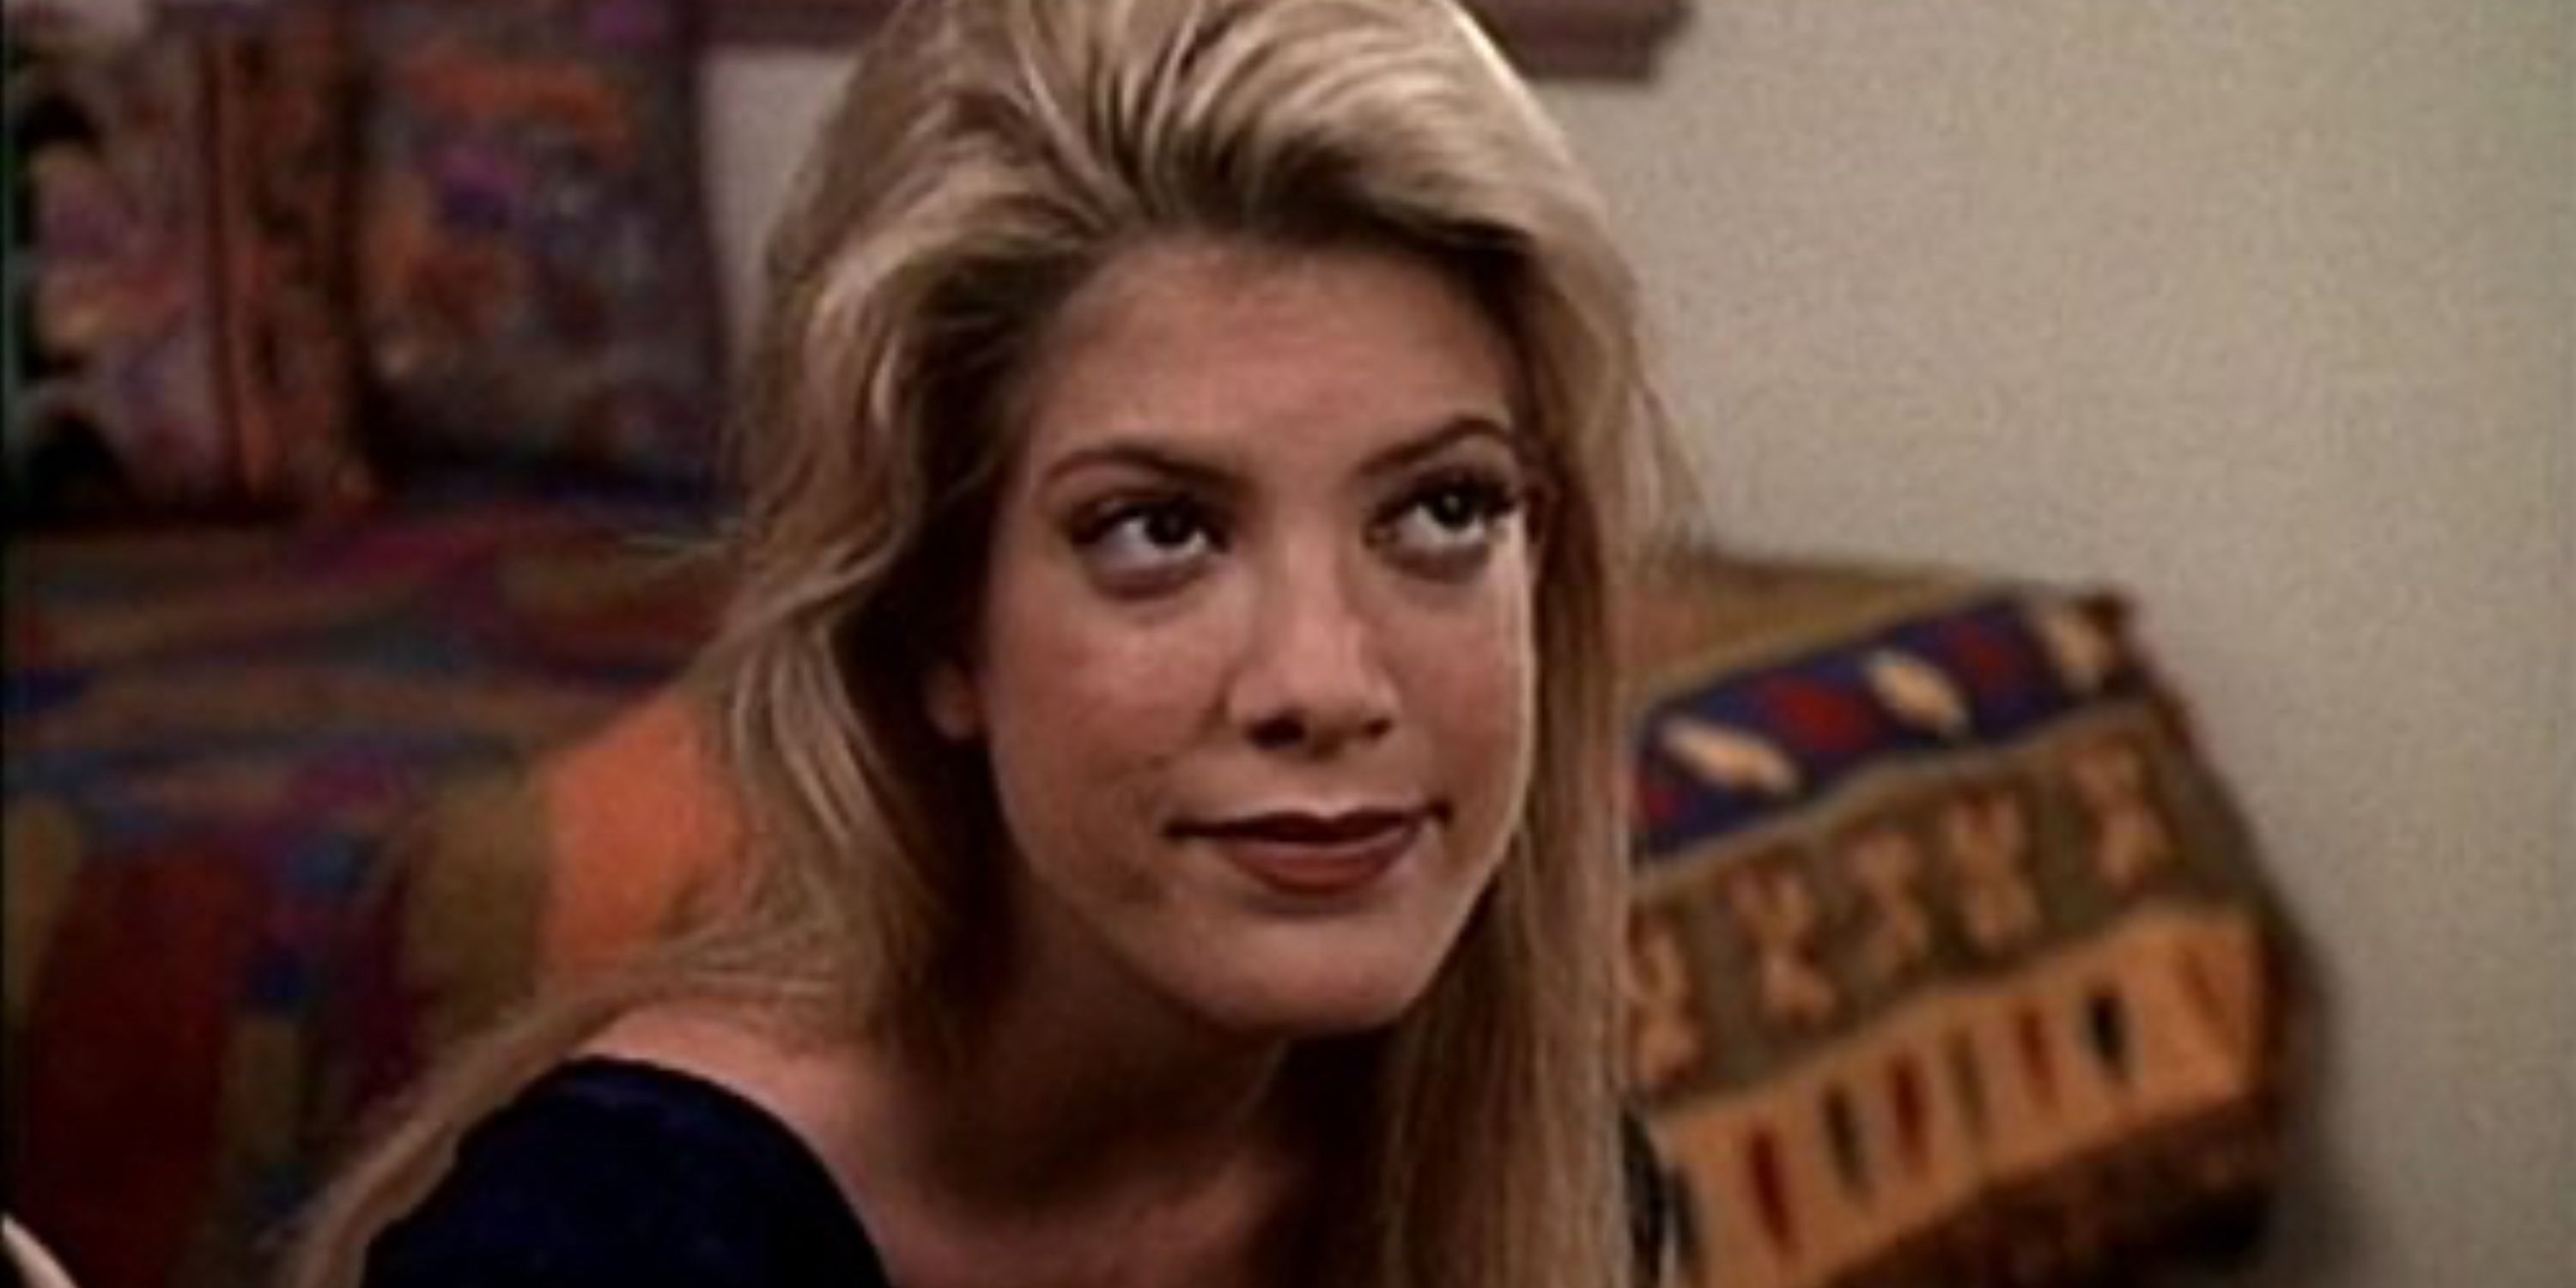 Donna Martin portrayed by Tori Spelling